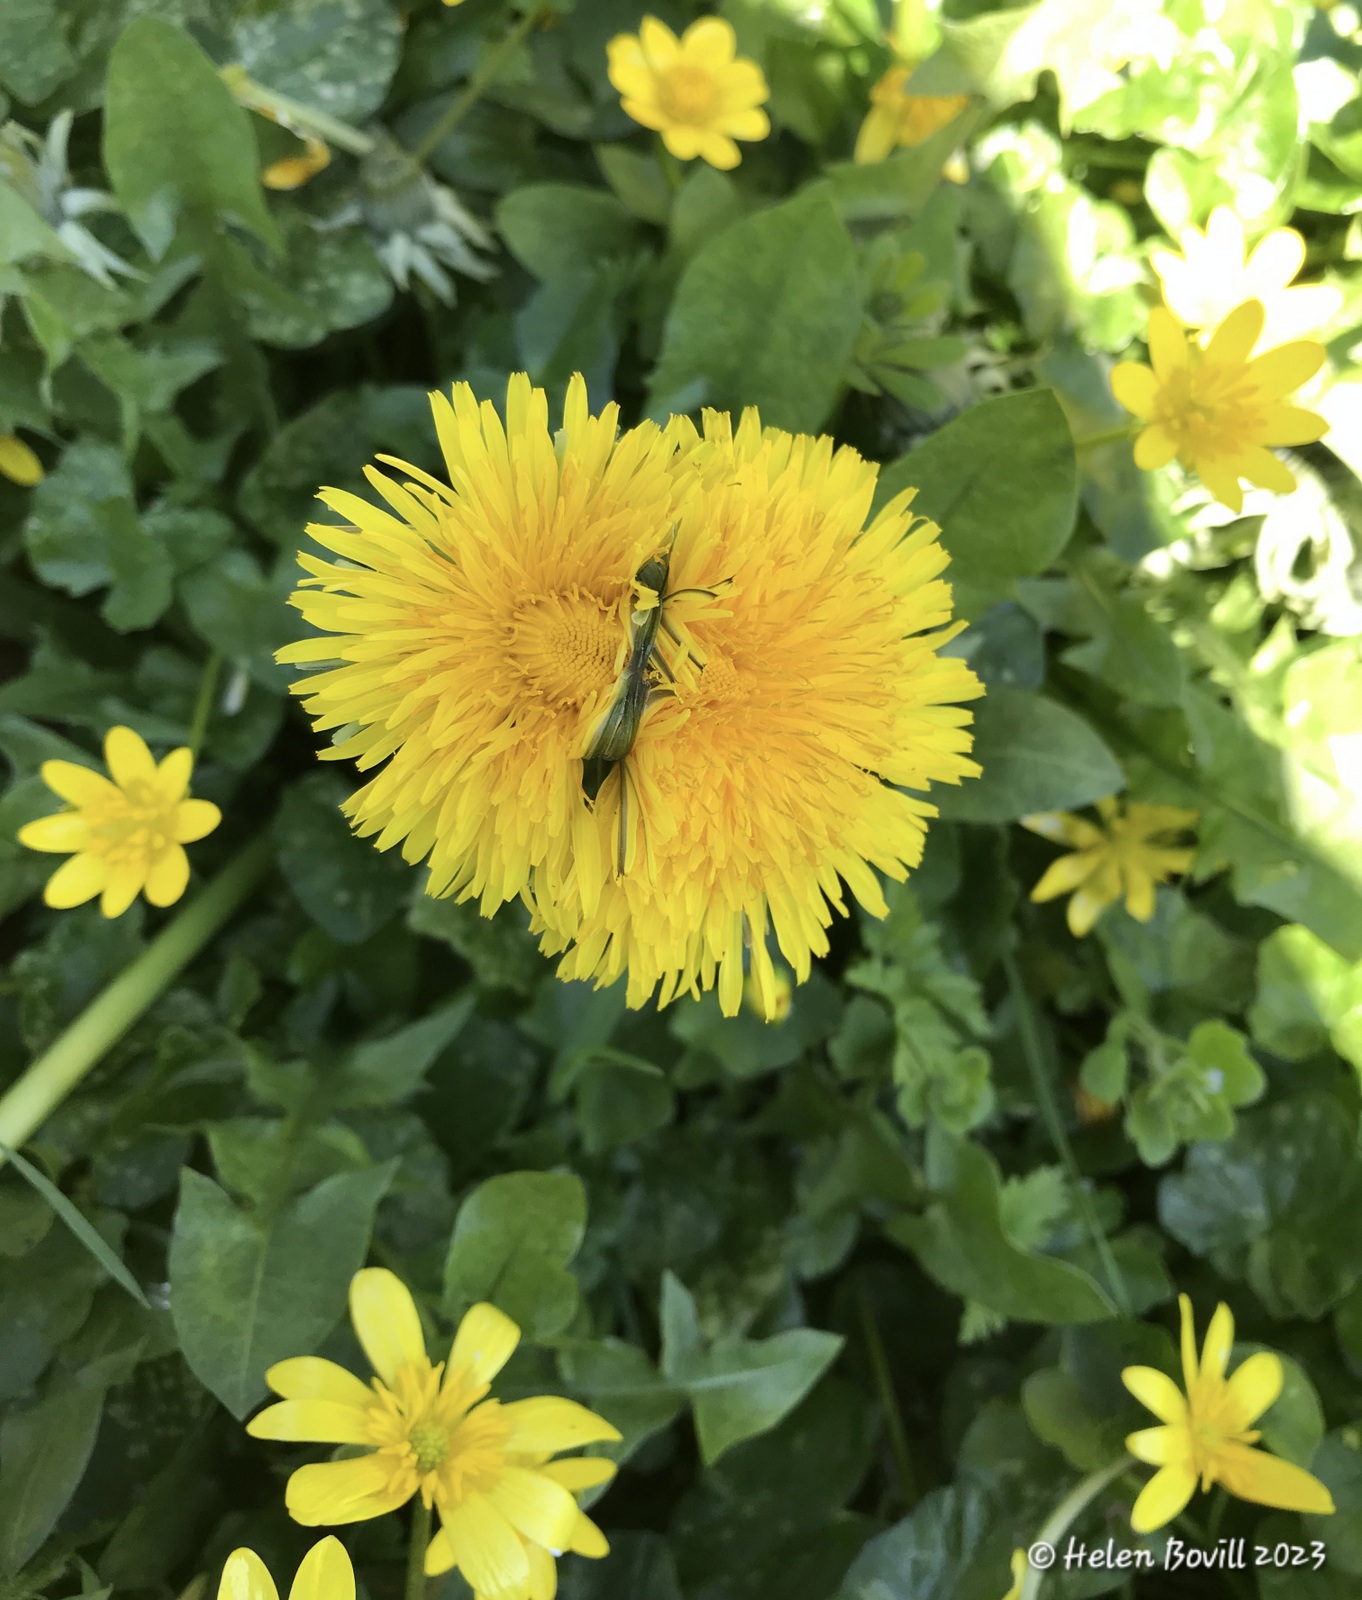 A double Dandelion surrounded by Celandines